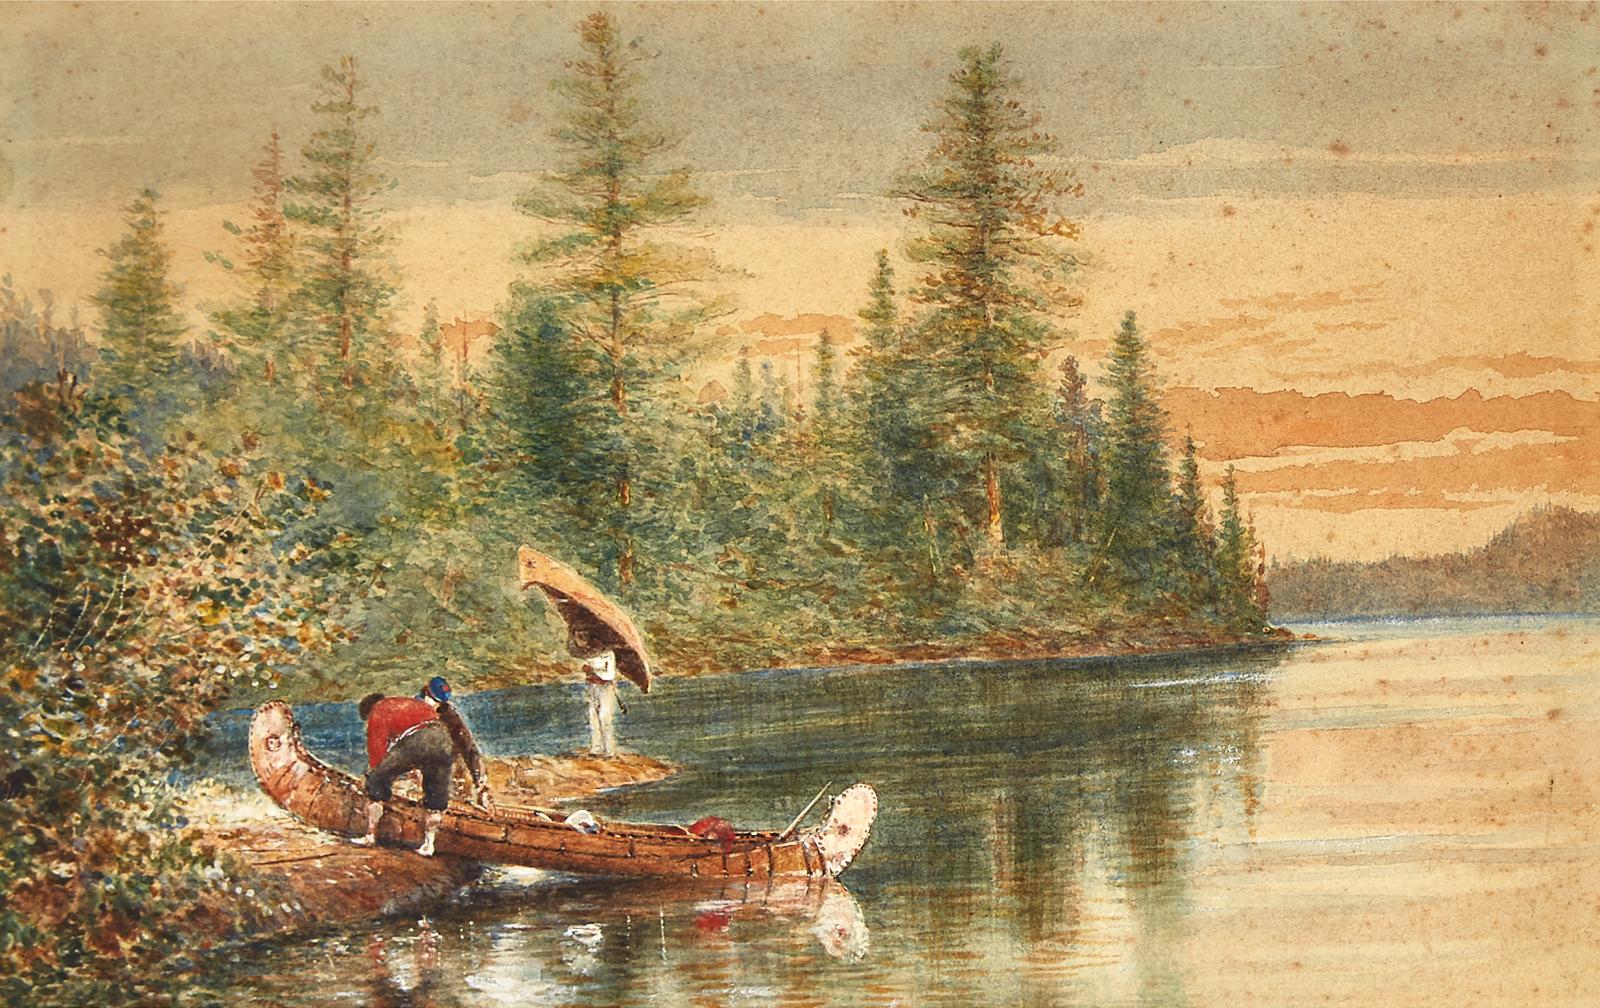 William Henry Edward Napier (1829-1894) - Portaging Their Canoes, 1857